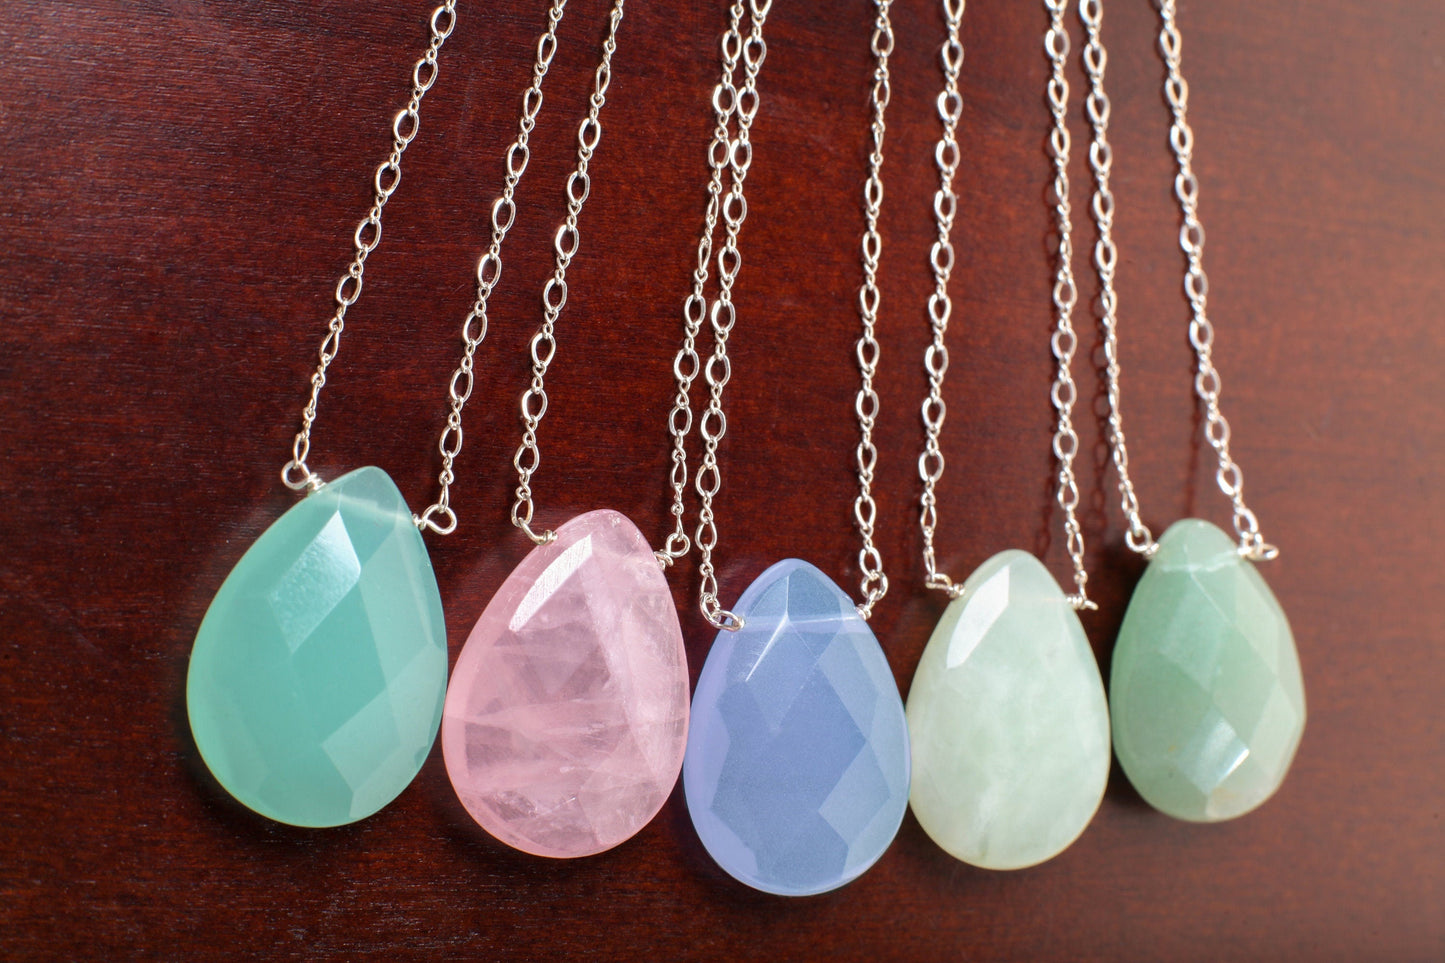 Aqua Chalcedony Faceted Pear Drop 22x30mm, Natural Gemstones in 925 Sterling Silver Chain or 14K Gold Filled Chain